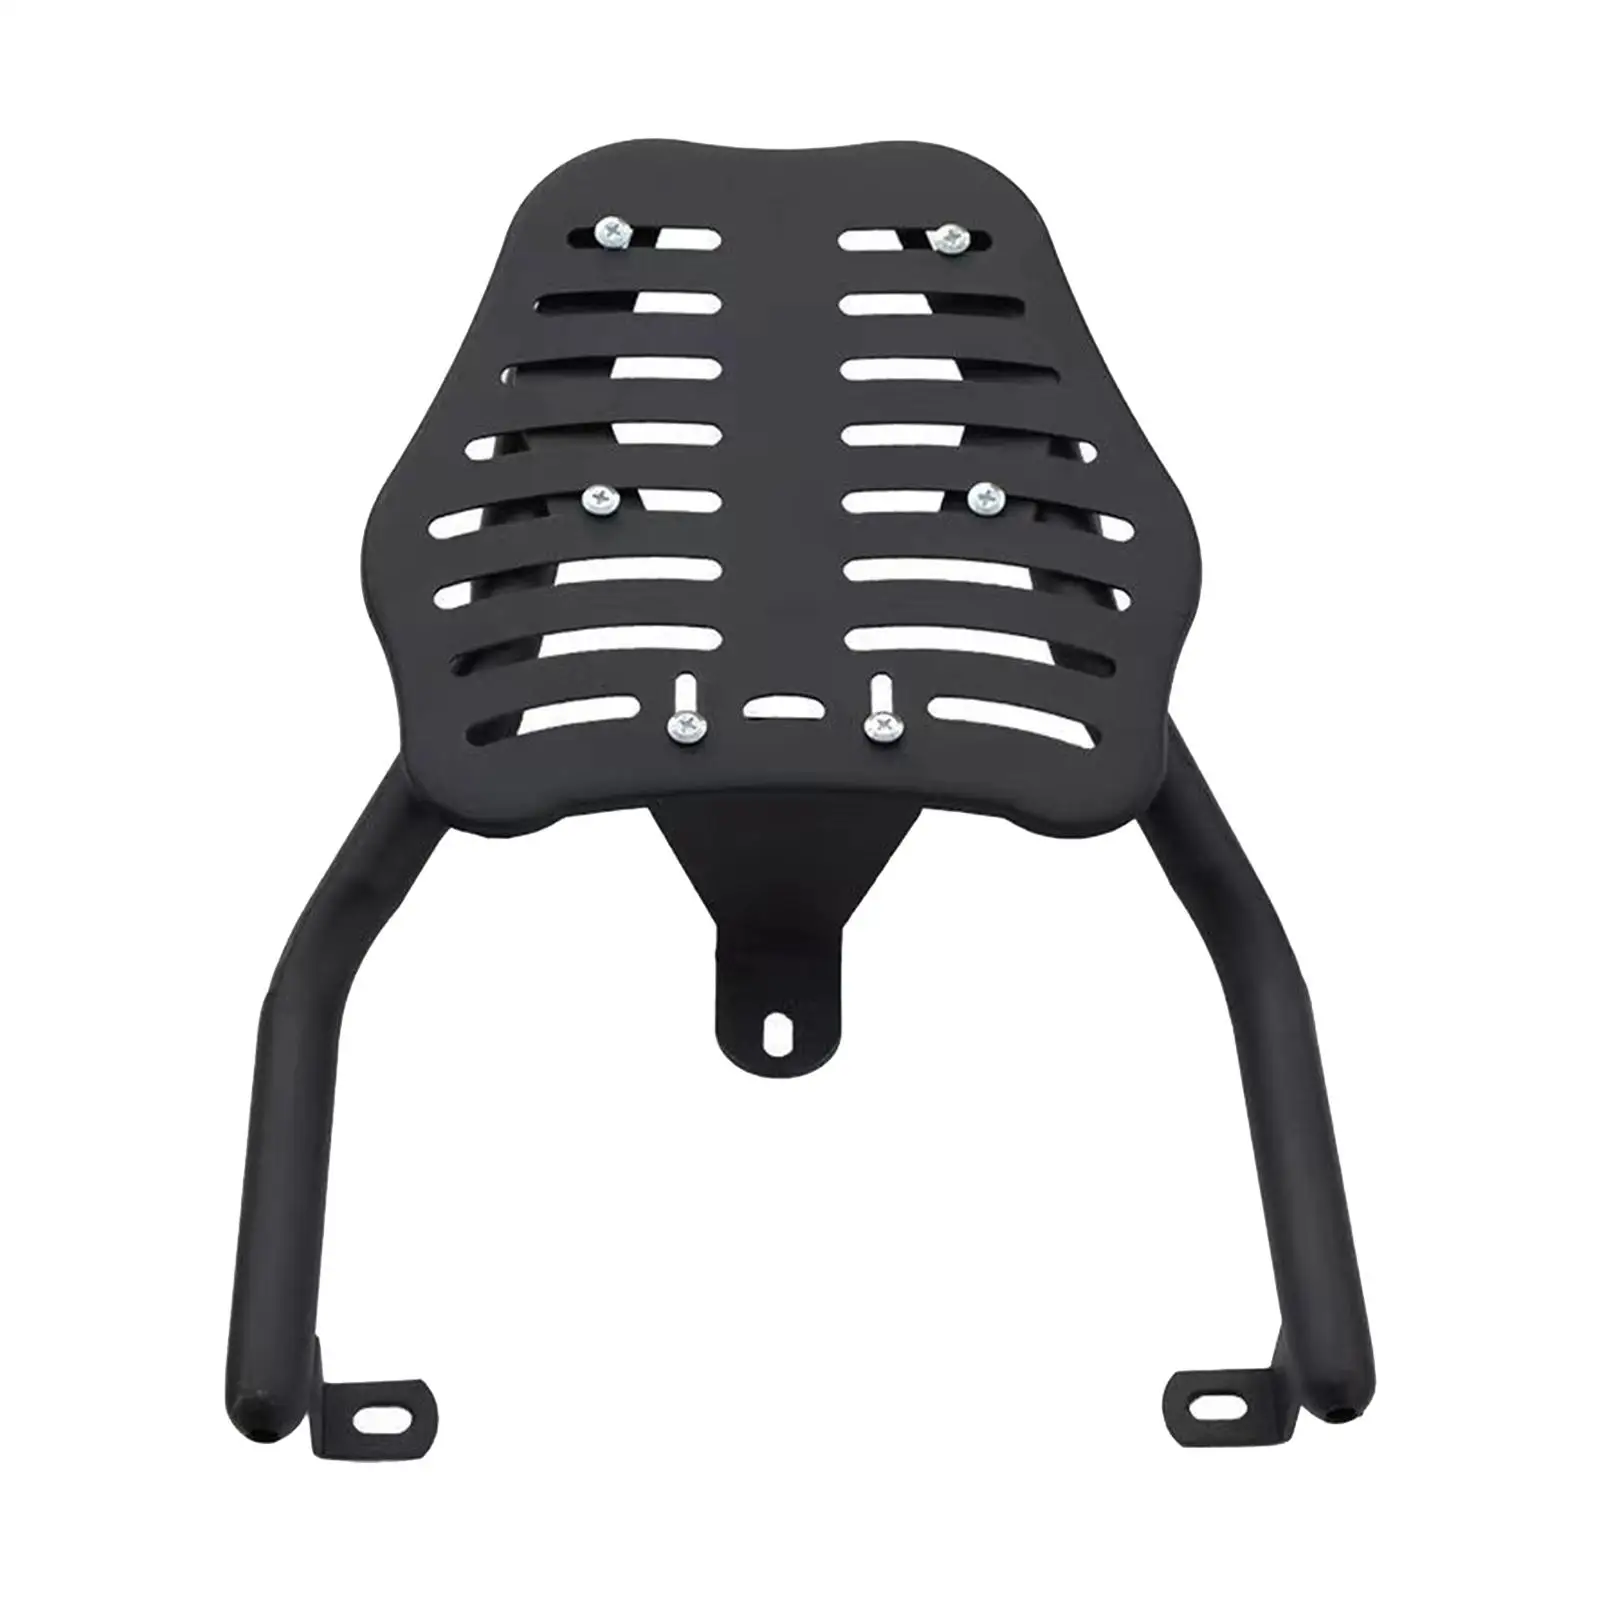 Rear Luggage Rack Carrier Iron Accessory Motorcycle Holder Seat Luggage Rack